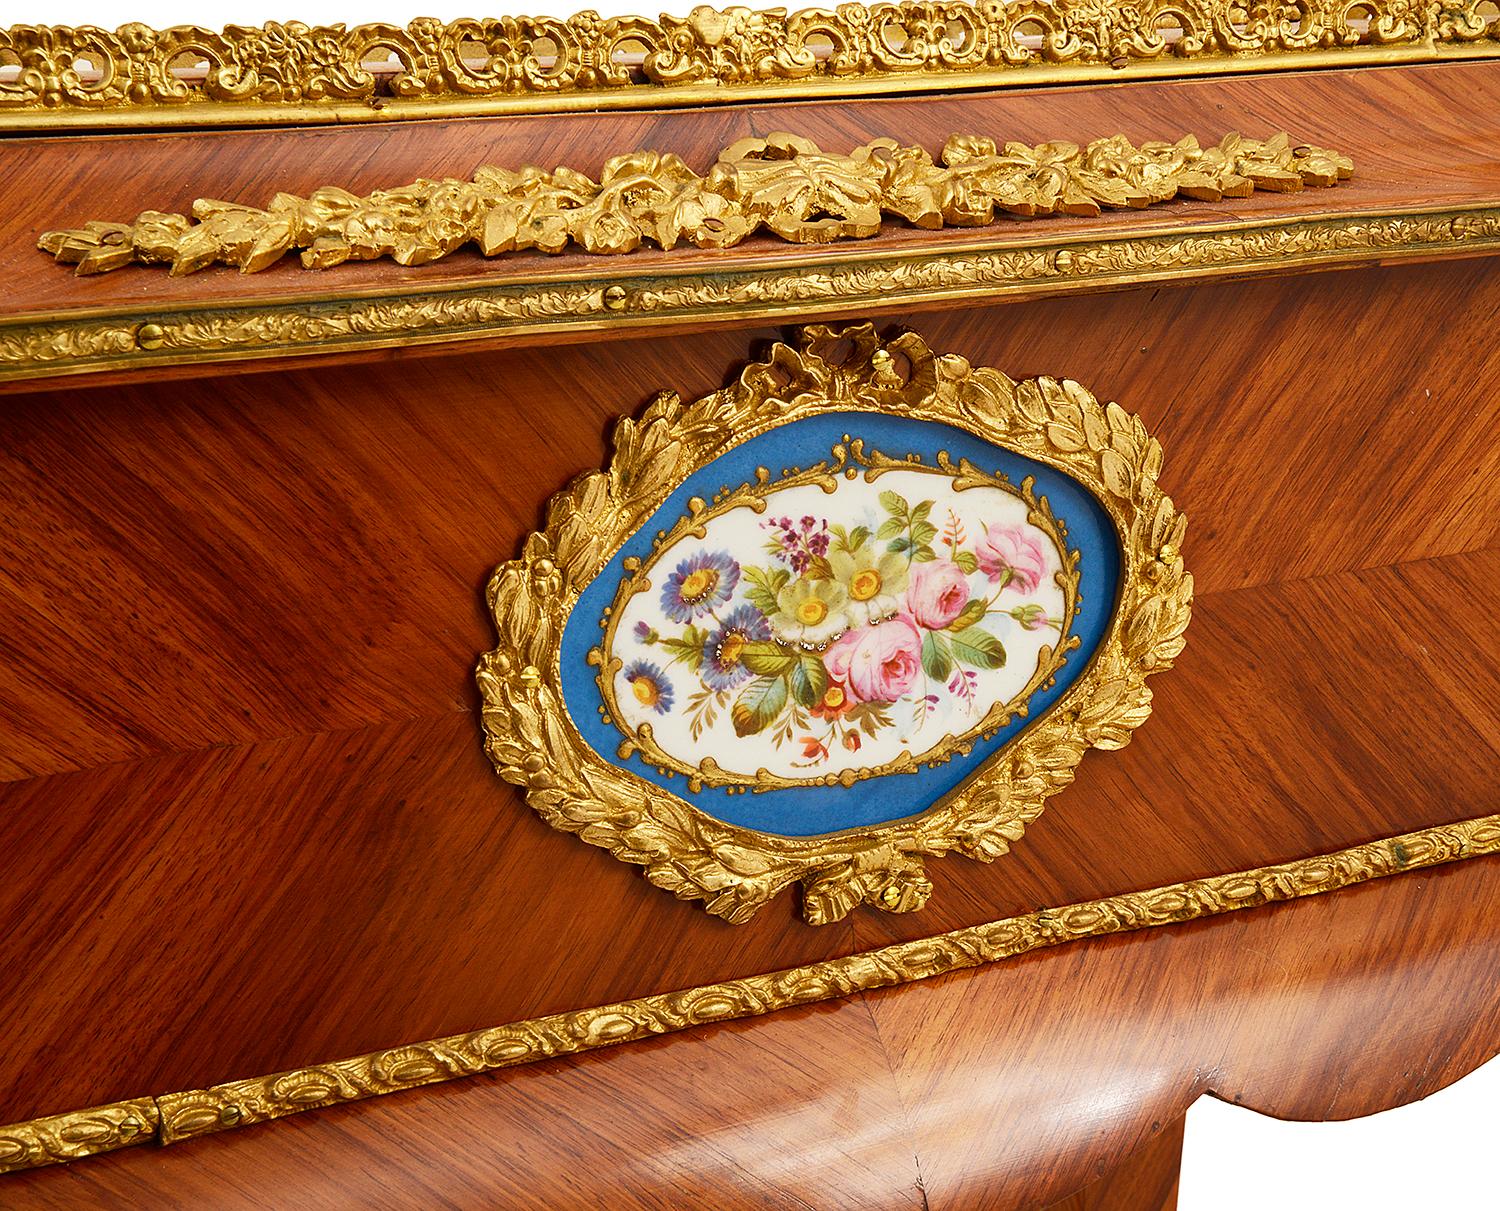 19th century French Kingwood table / jardiniere, having gilded ormolu mouldings and mounts. The lid lifting up to reveal a compartment for plants, flowers or can be used as a celleret (wine bottles etc). Sevres style porcelain plaques with floral